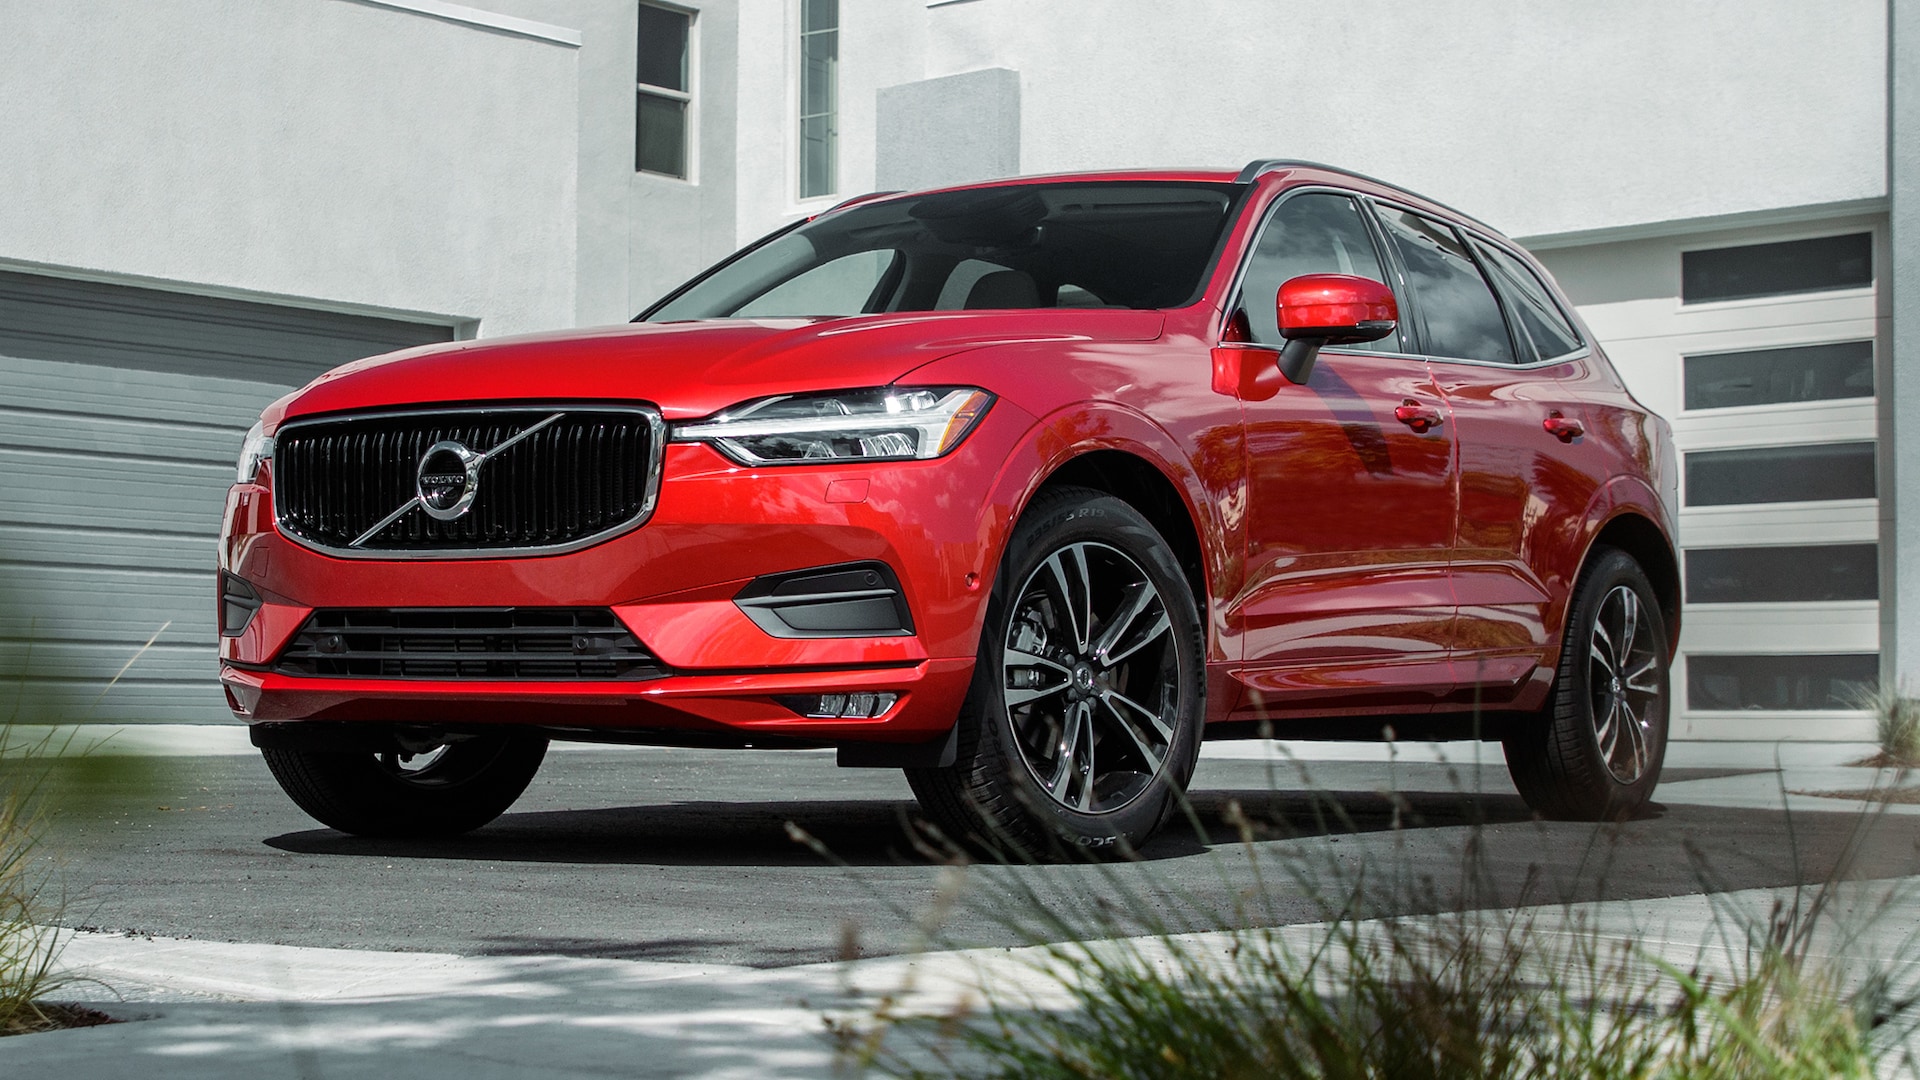 Is the Volvo XC60 a Better Commuter or Road Trip SUV?